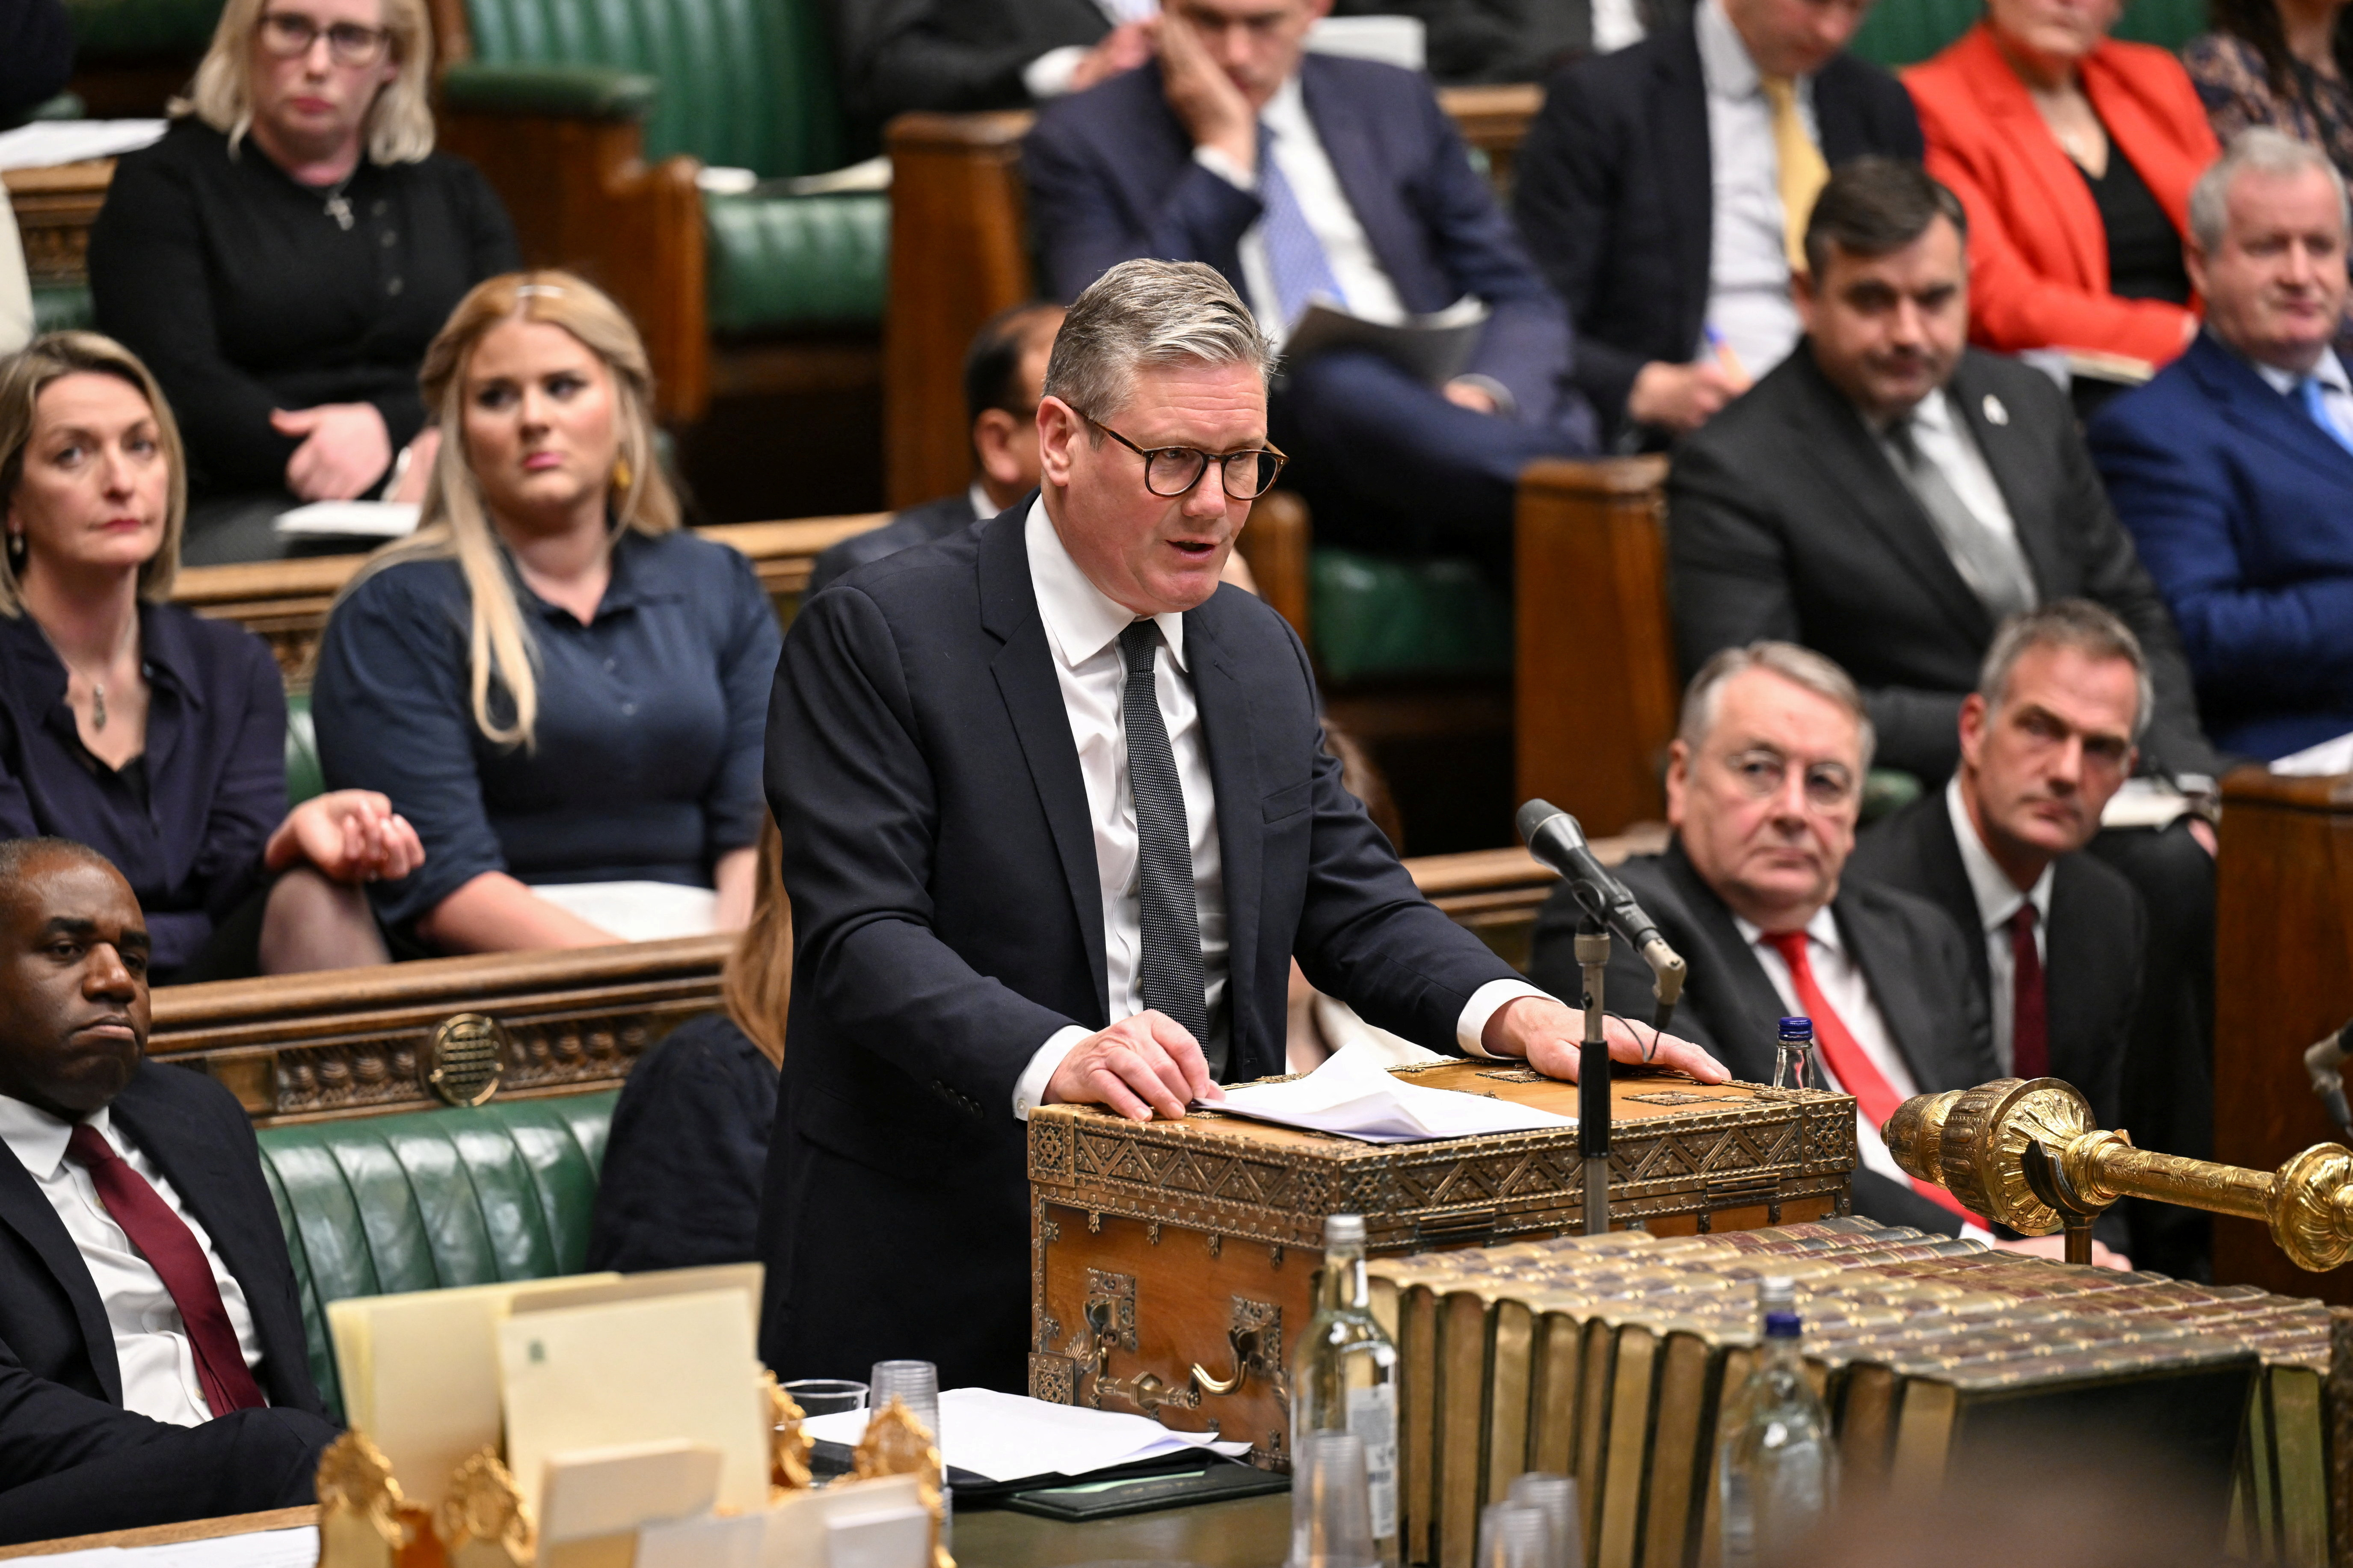 Keir Starmer, leader of Britain's Labour Party, speaks at the House of Commons in London